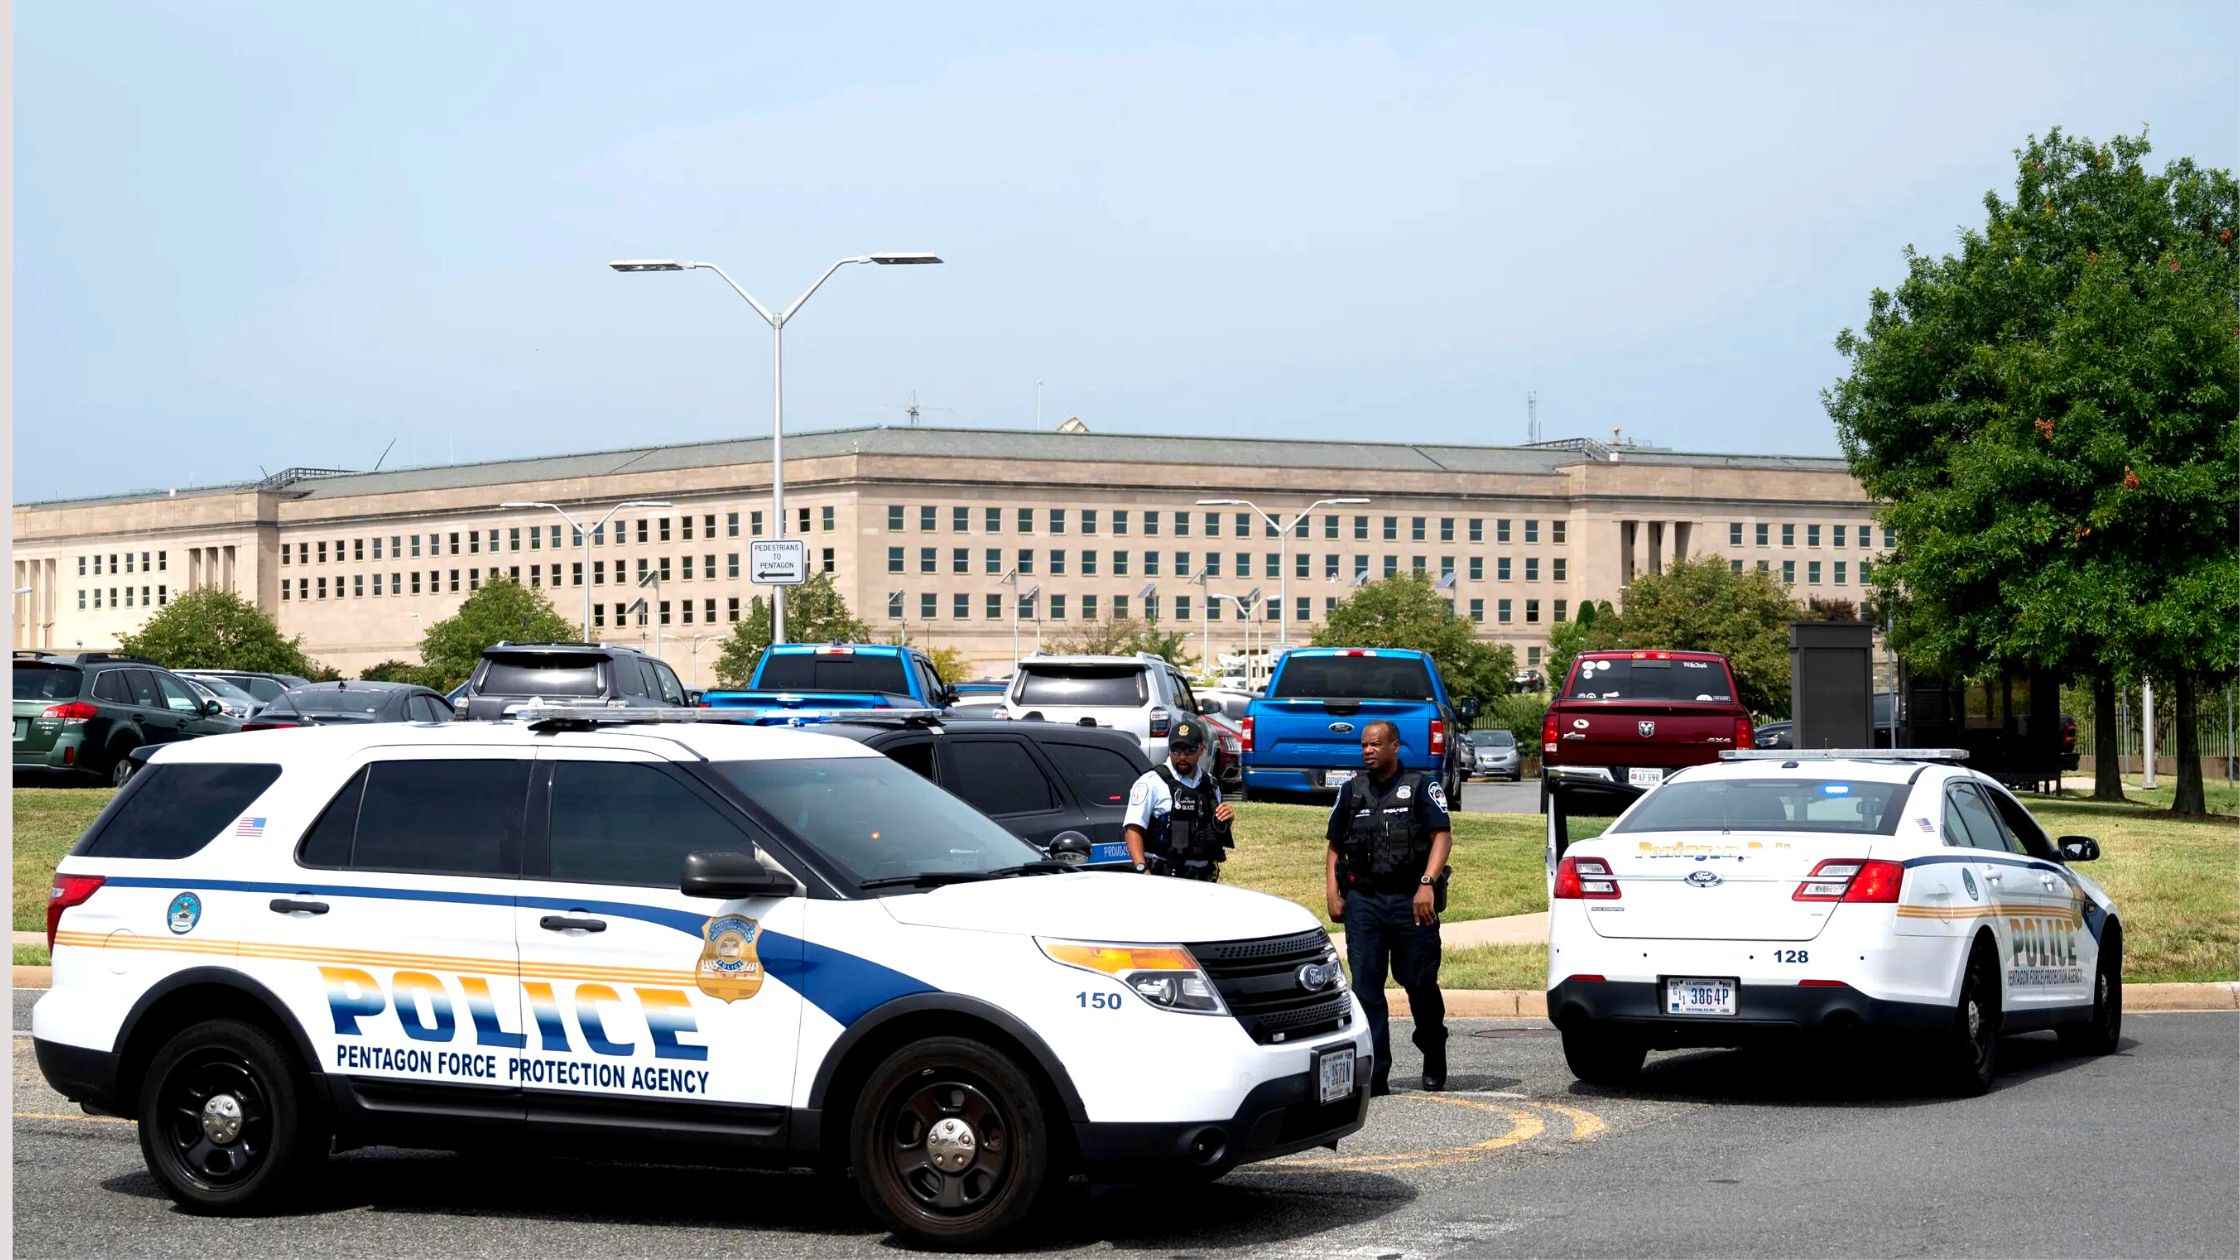 Pentagon Force Protection Agency office